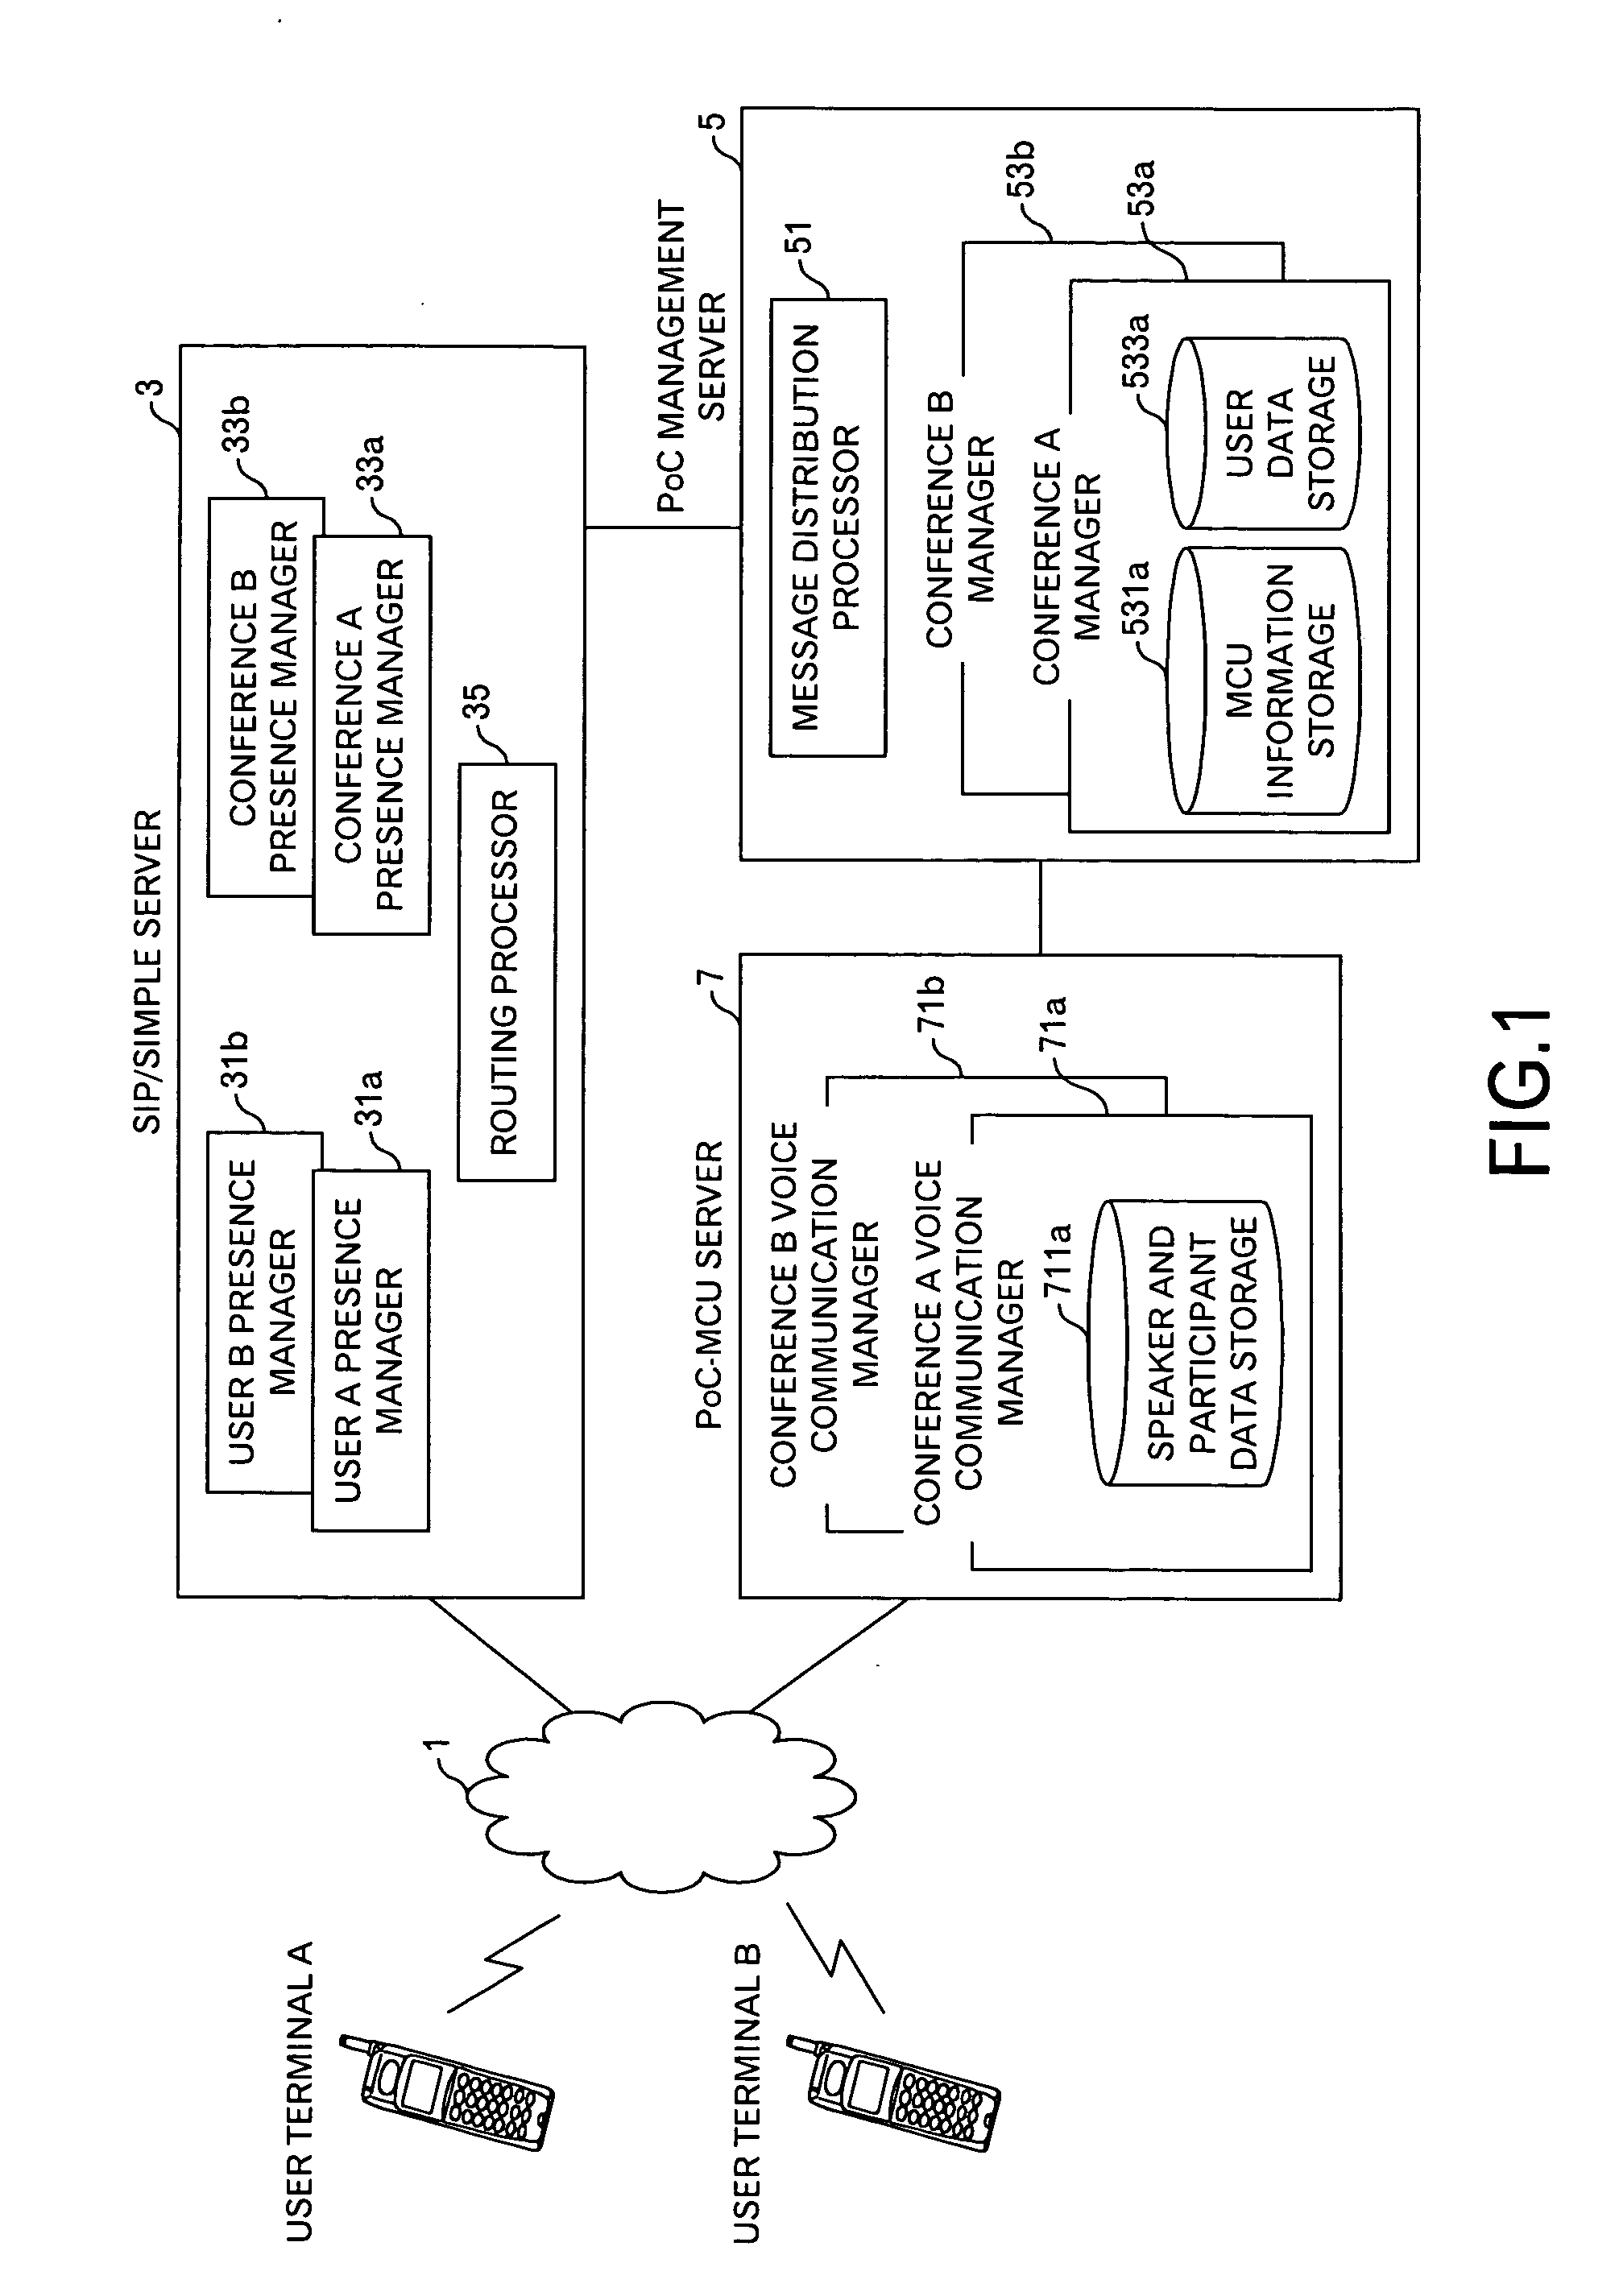 Communication control method and computer system